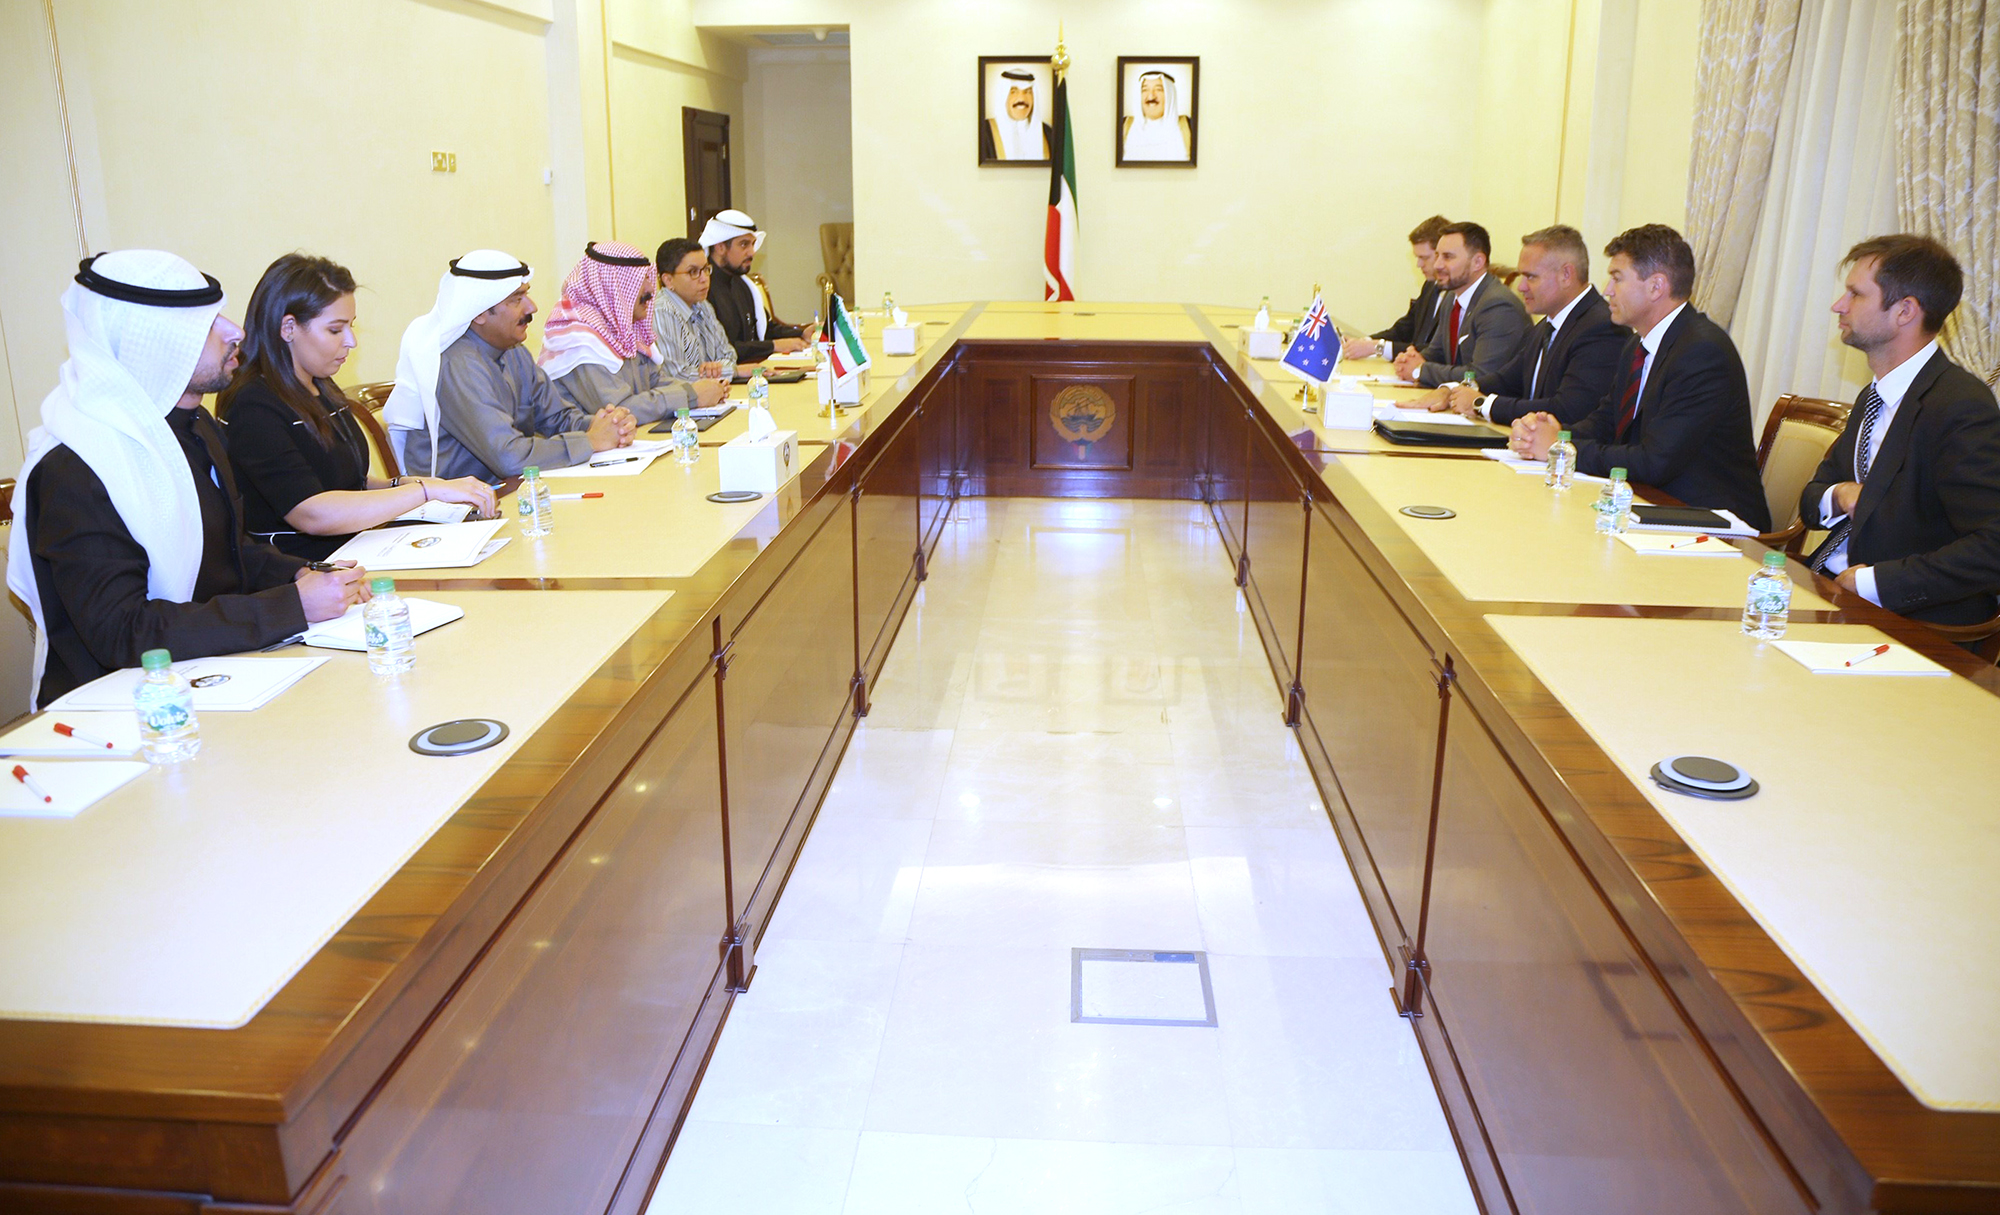 Kuwaiti Deputy Minister of Foreign Affairs Khaled Al-Jarallah during the meeting with New Zealand's Under-Secretary to the Minister of Foreign Affairs Fletcher Tabuteau and his accompanying delegation